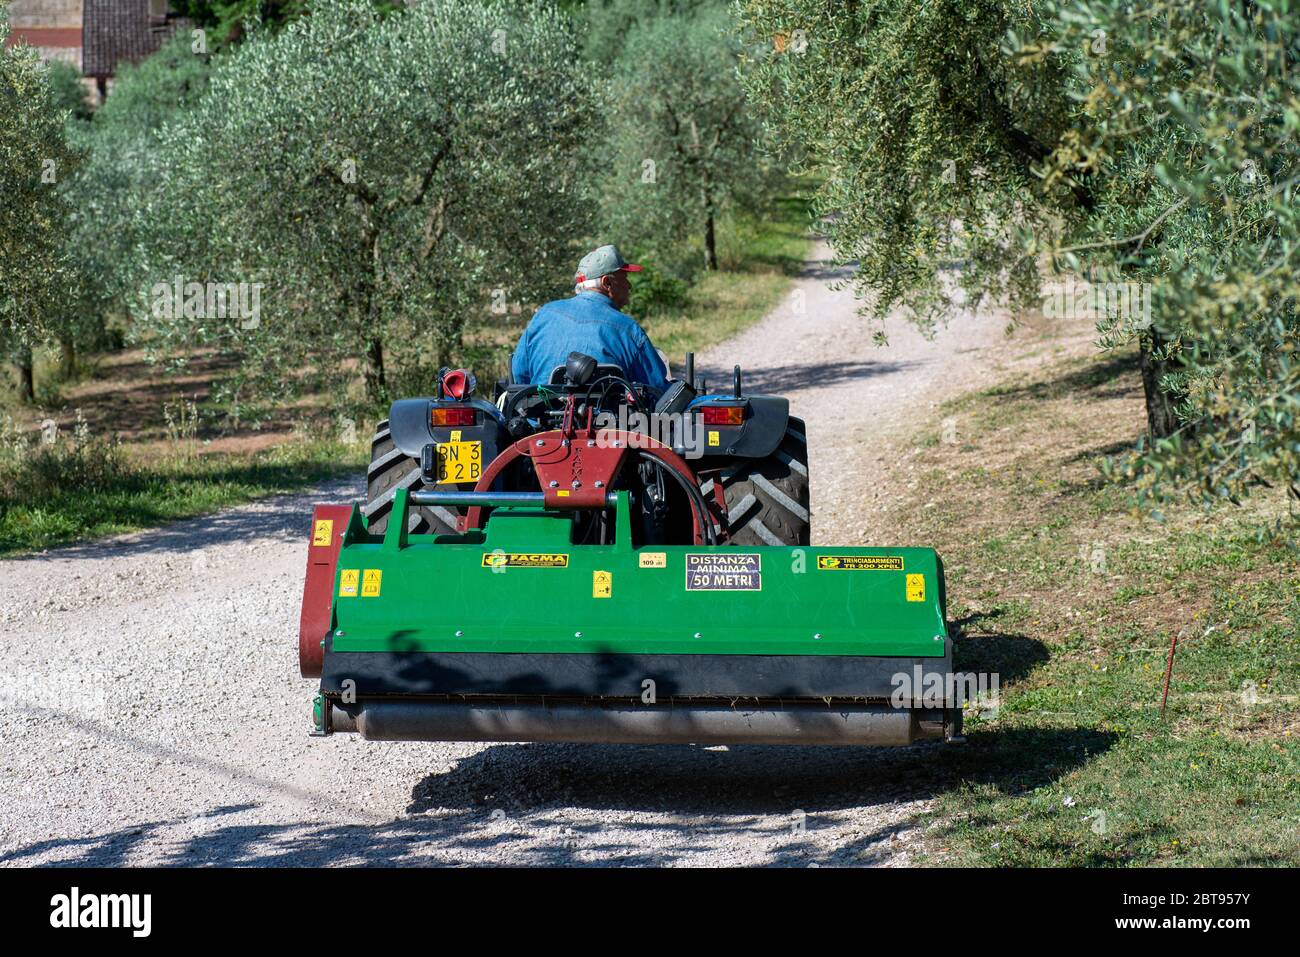 terni, italy may 24 2020:tractor and stalk chopper ready for chopping in the sun Stock Photo